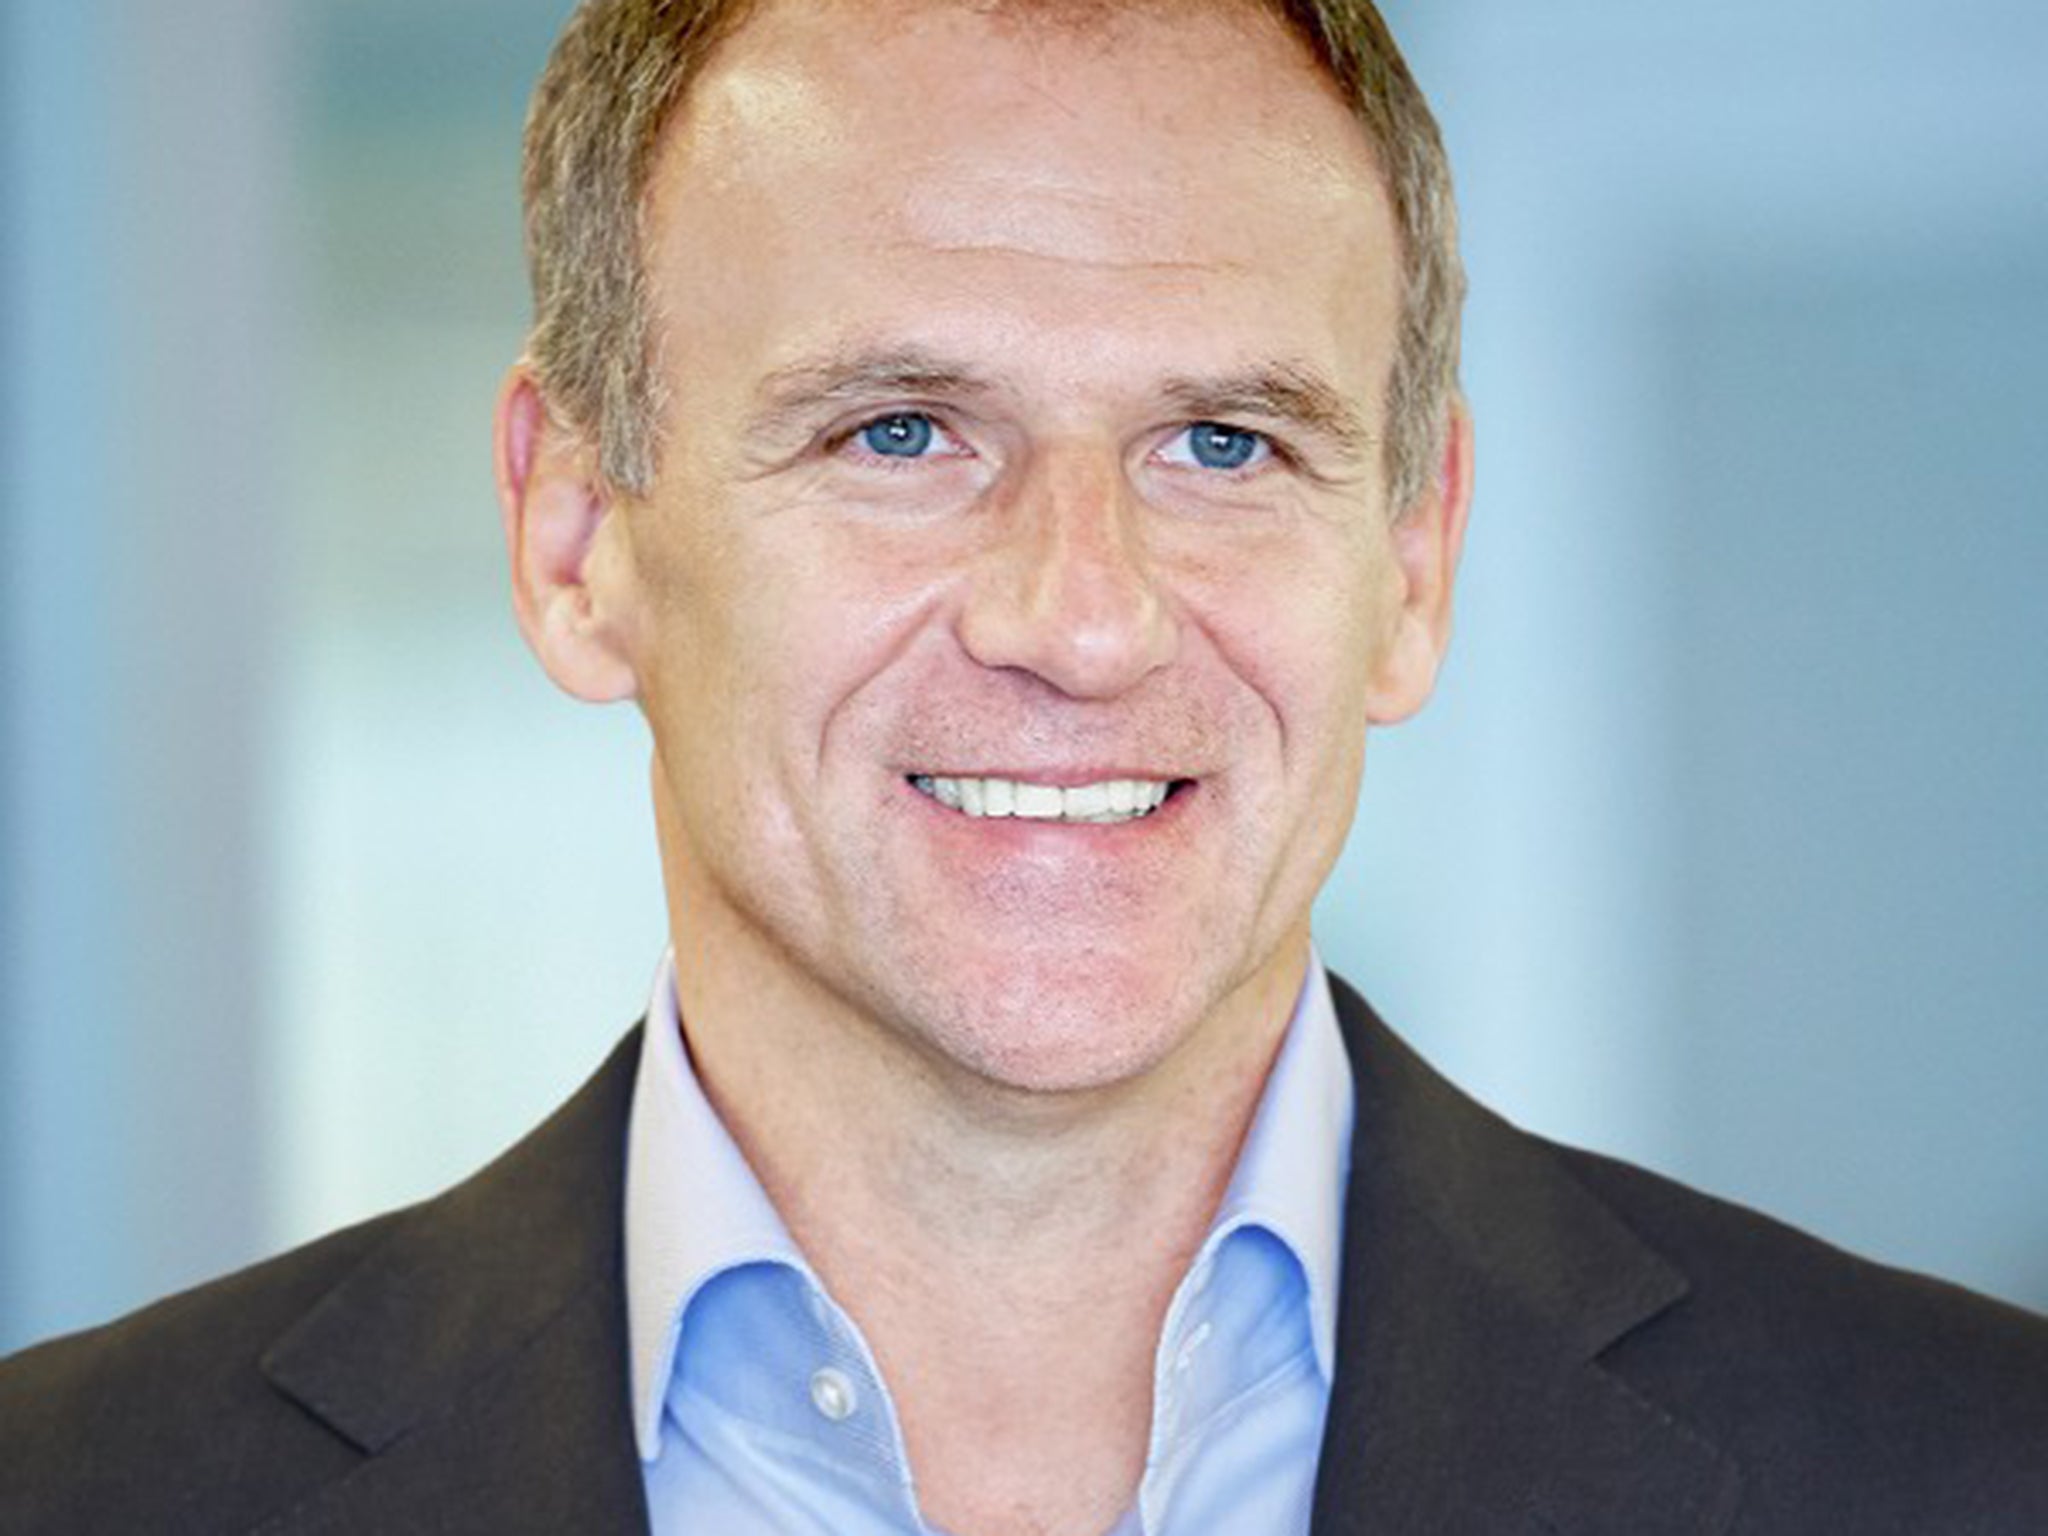 Dave Lewis became CEO of Tesco last September